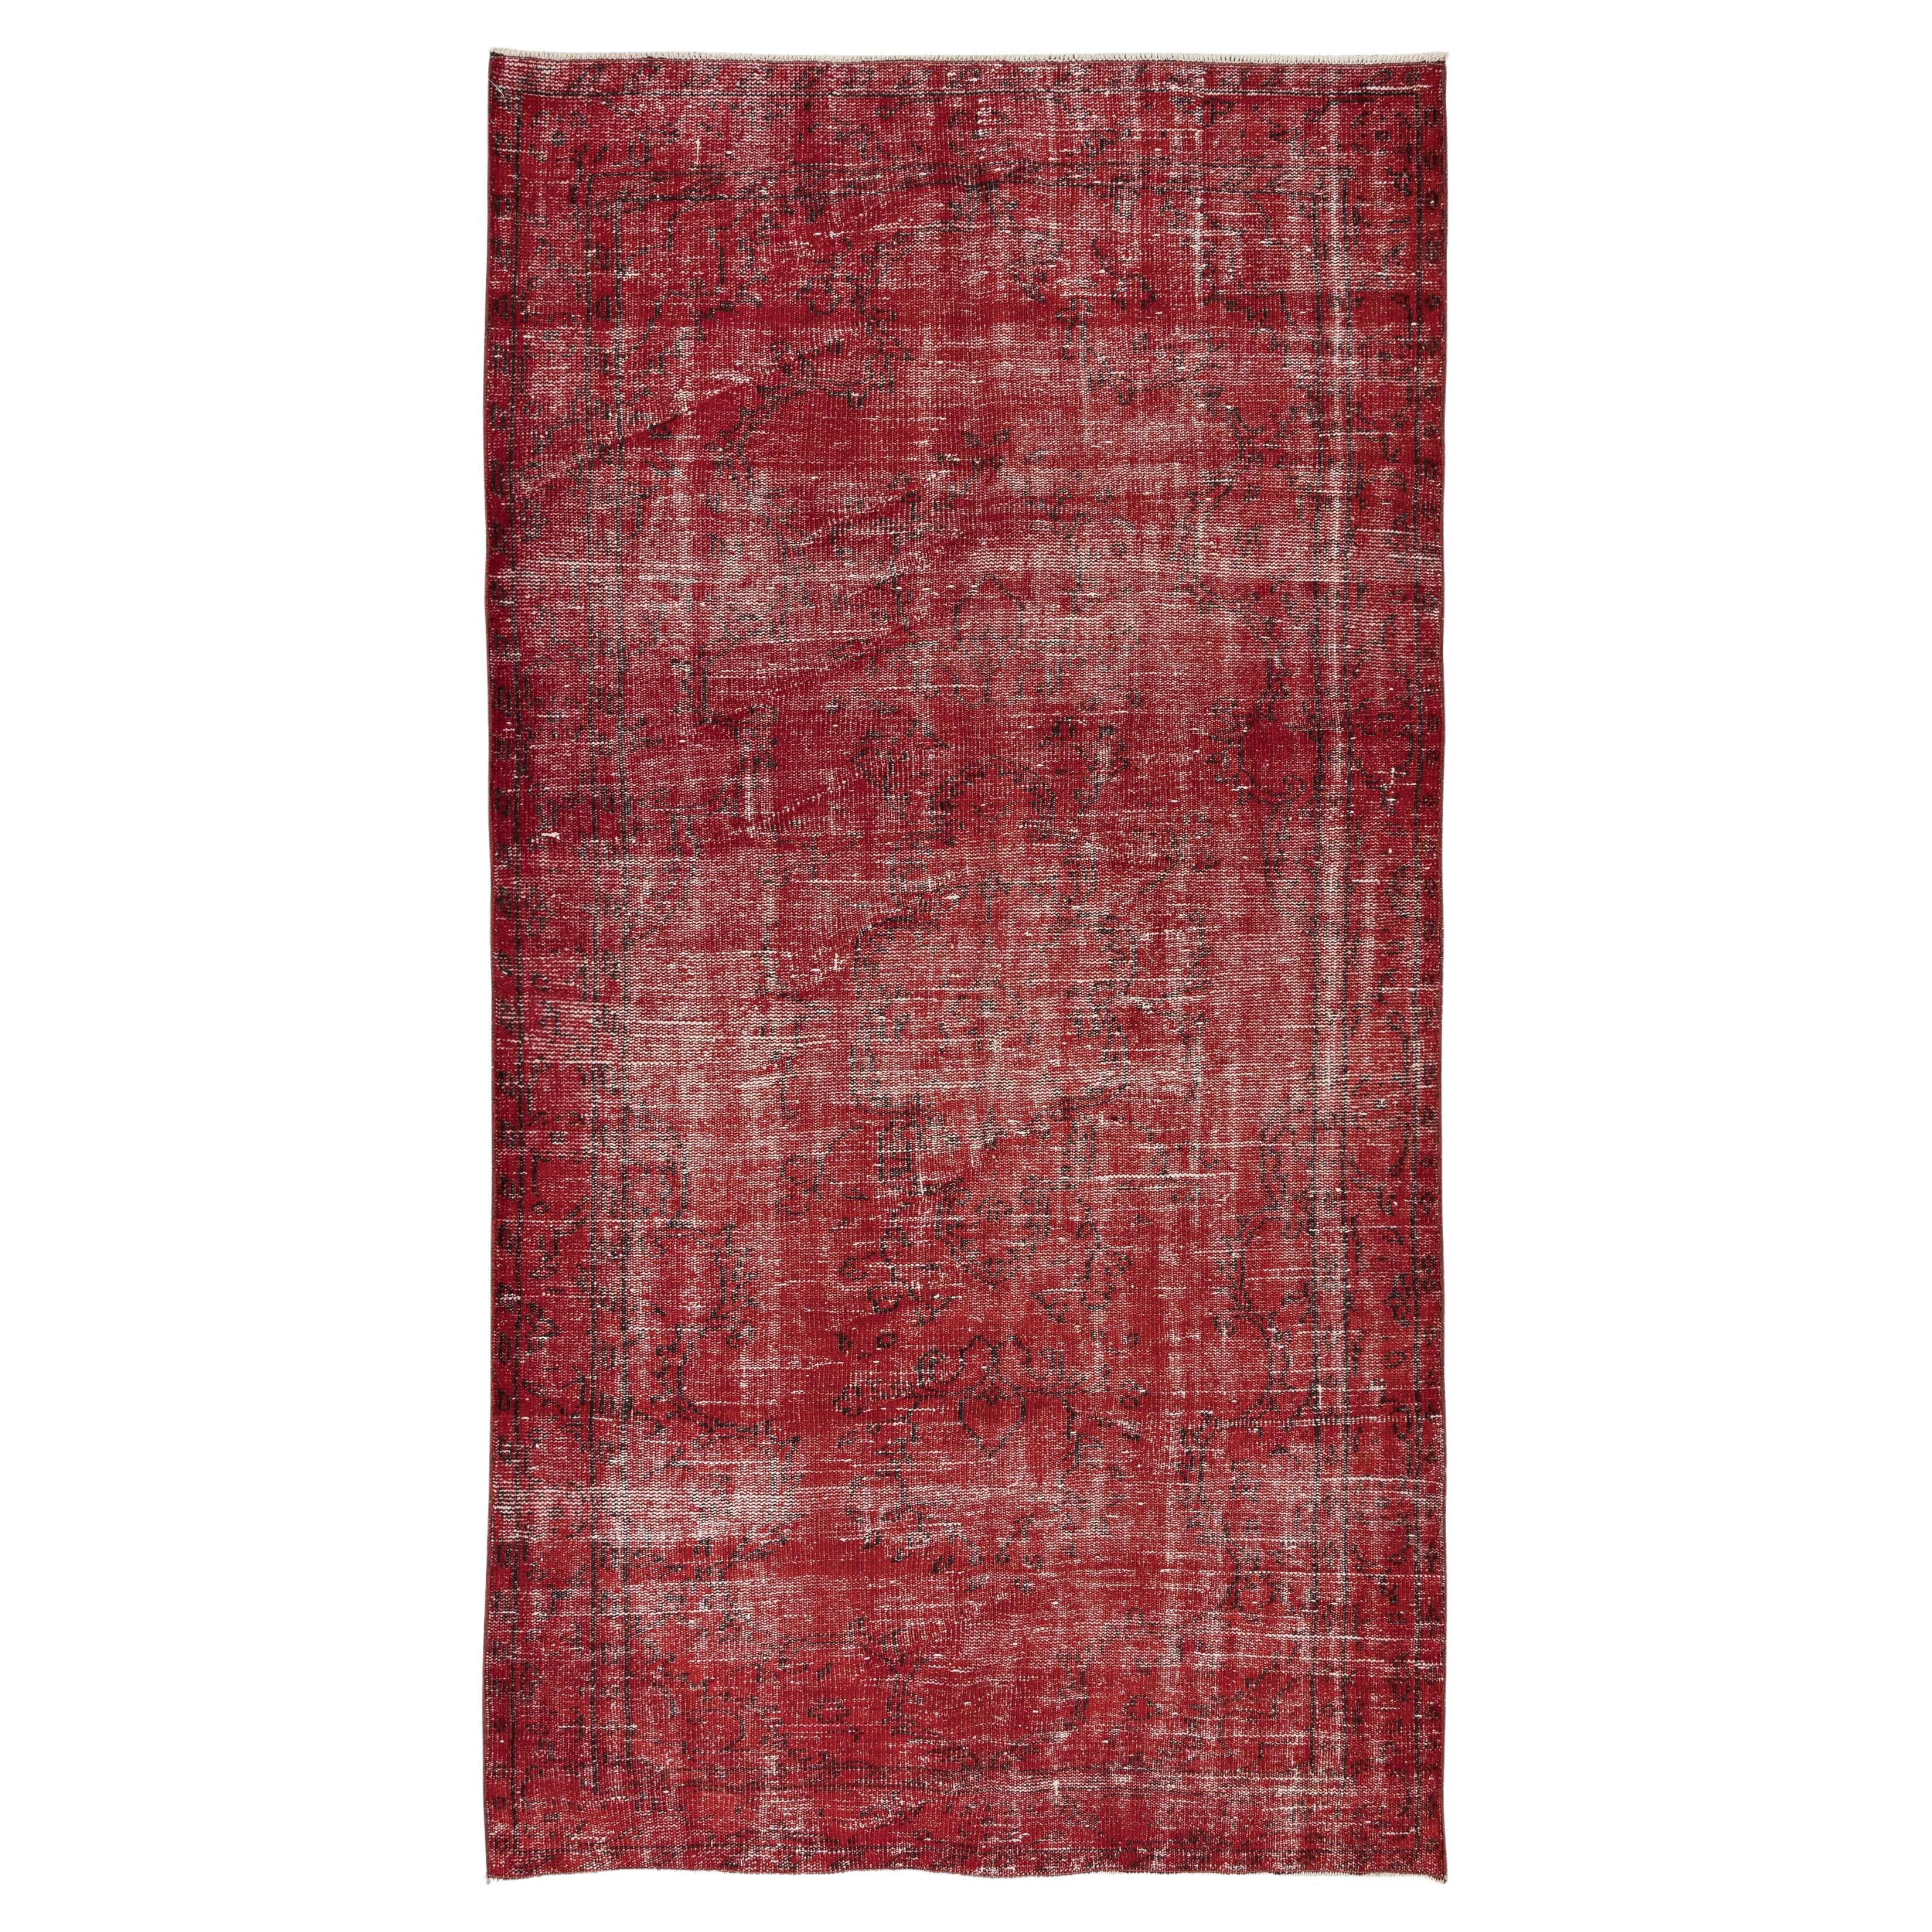 5x8.6 Ft Handmade 1960s Turkish Rug Re-Dyed in Red, Ideal for Modern Interiors